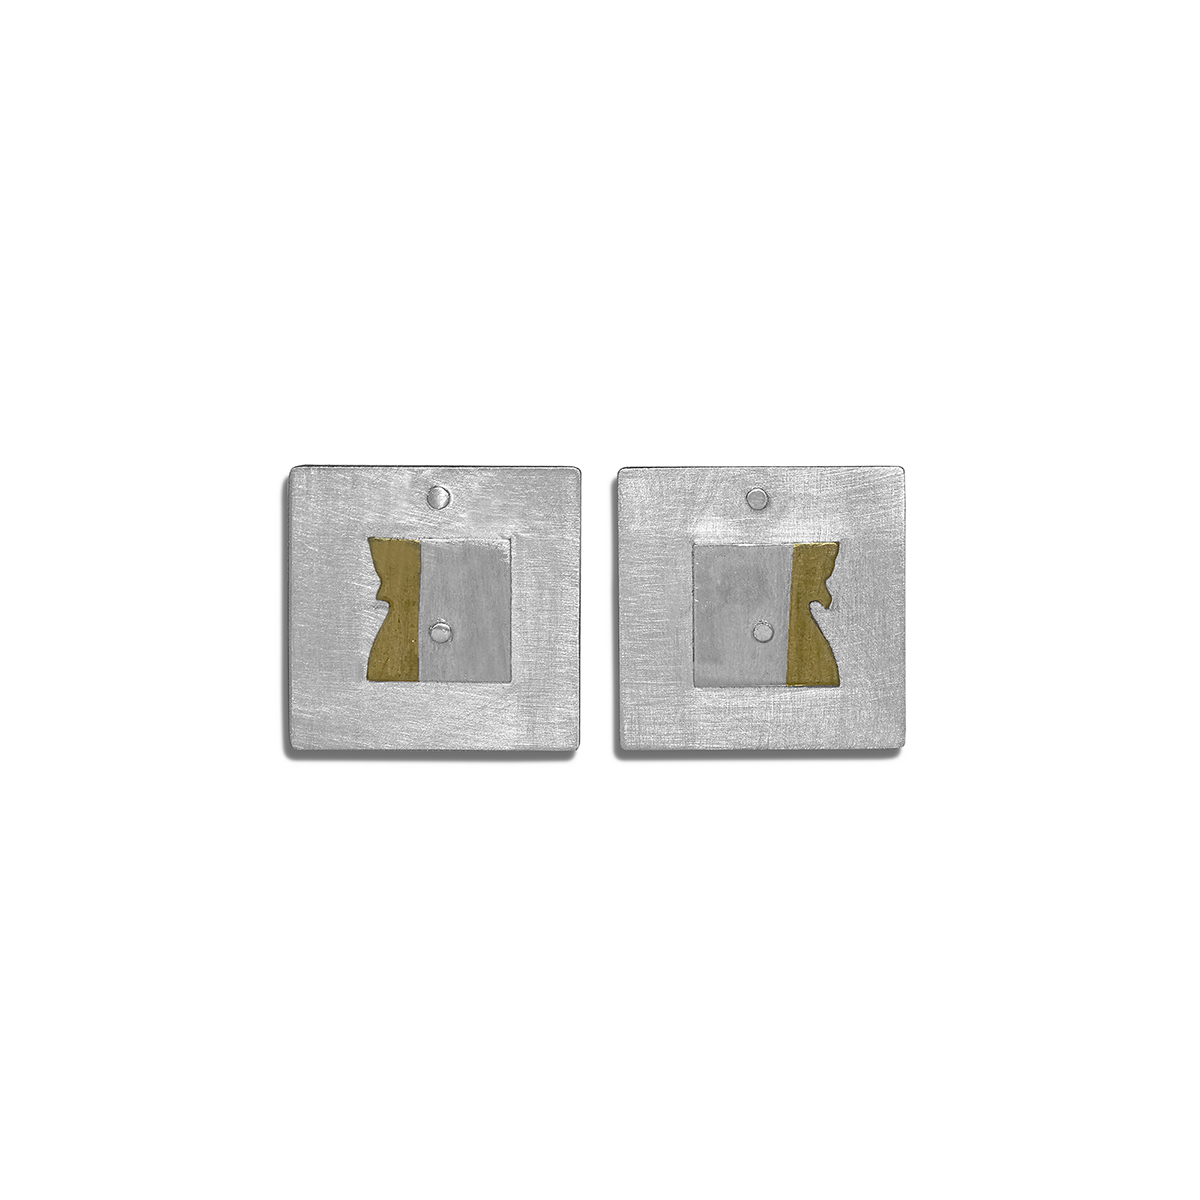  Modern Earrings in alluminum with 24kt gold and silver accents - 